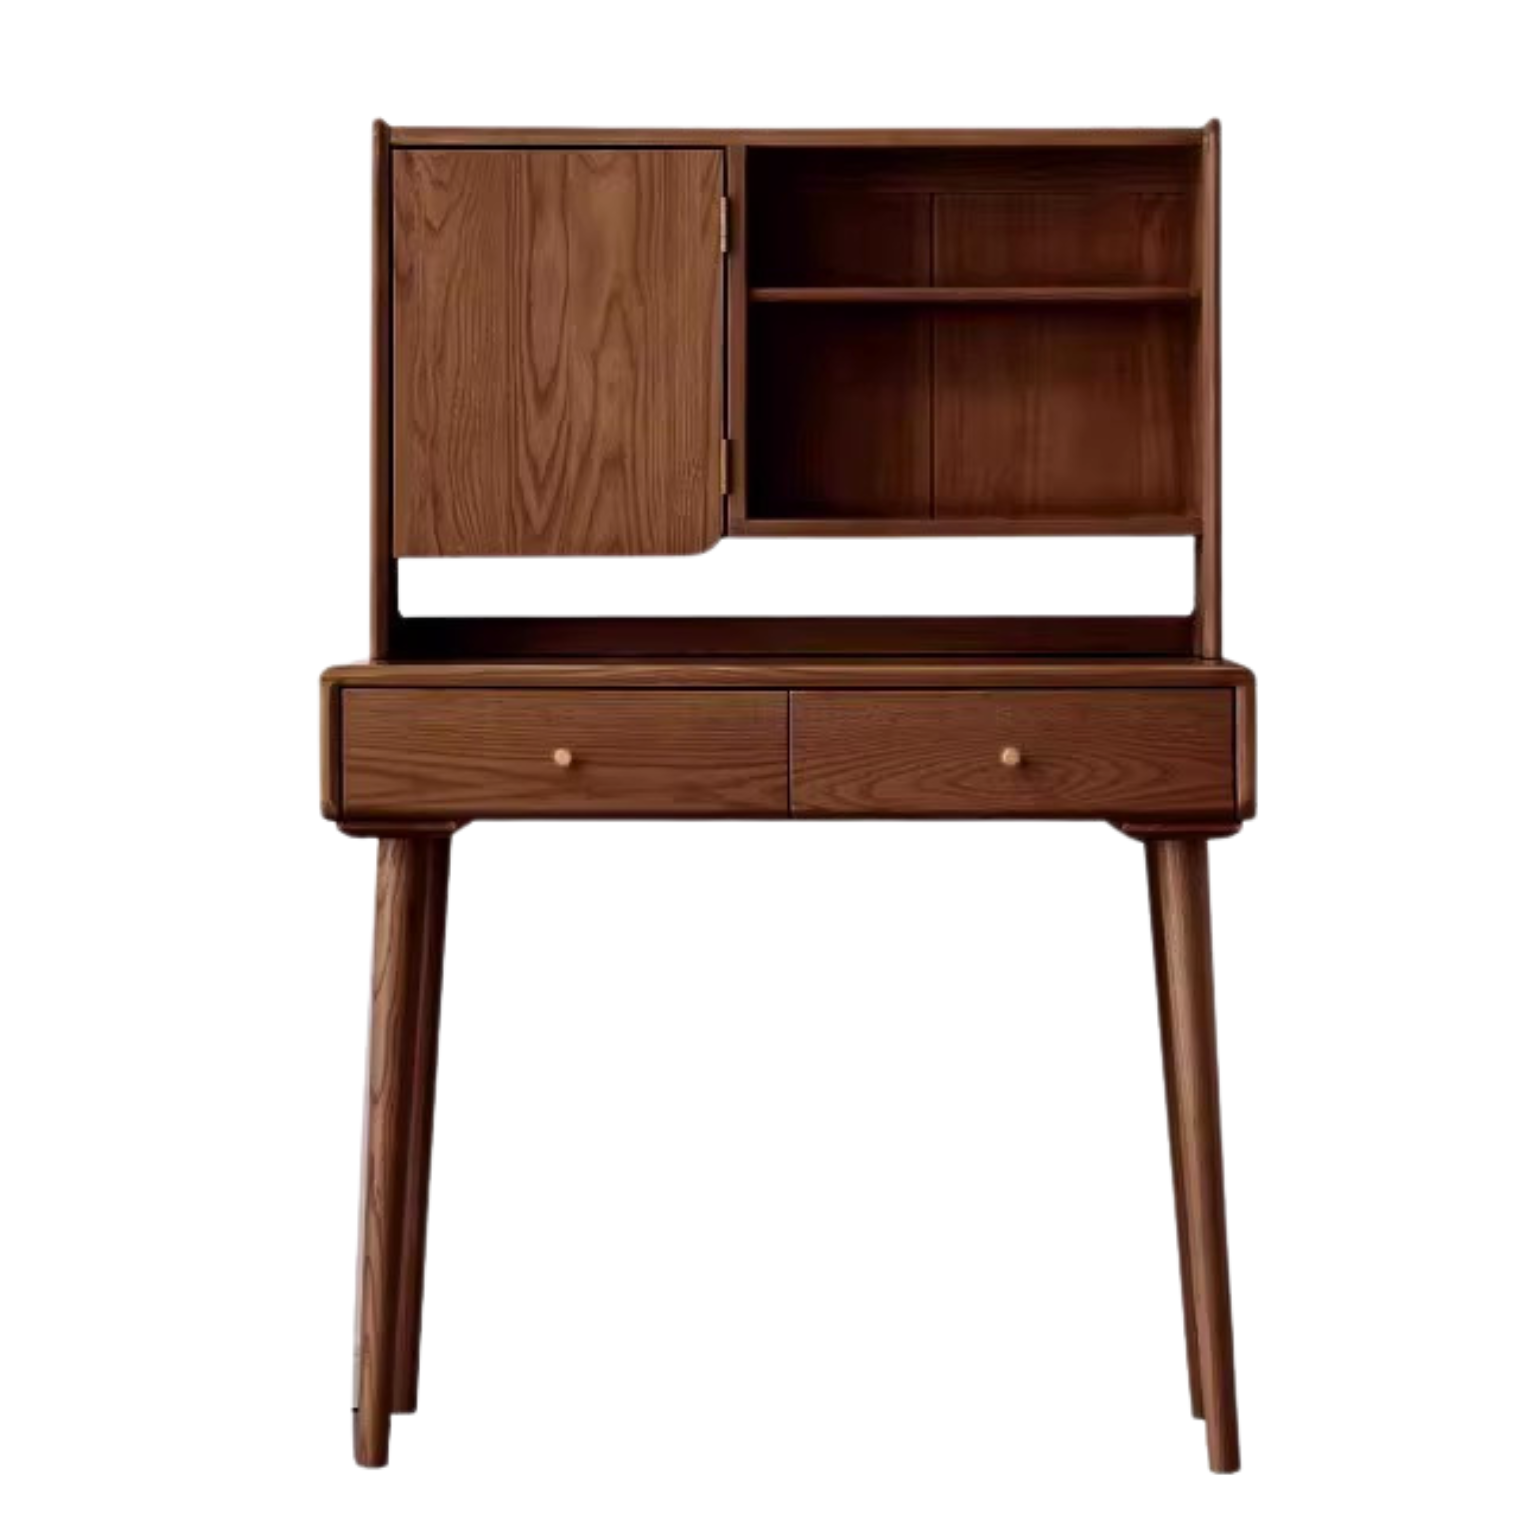 Ash Solid Wood walnut color Dressing Table: